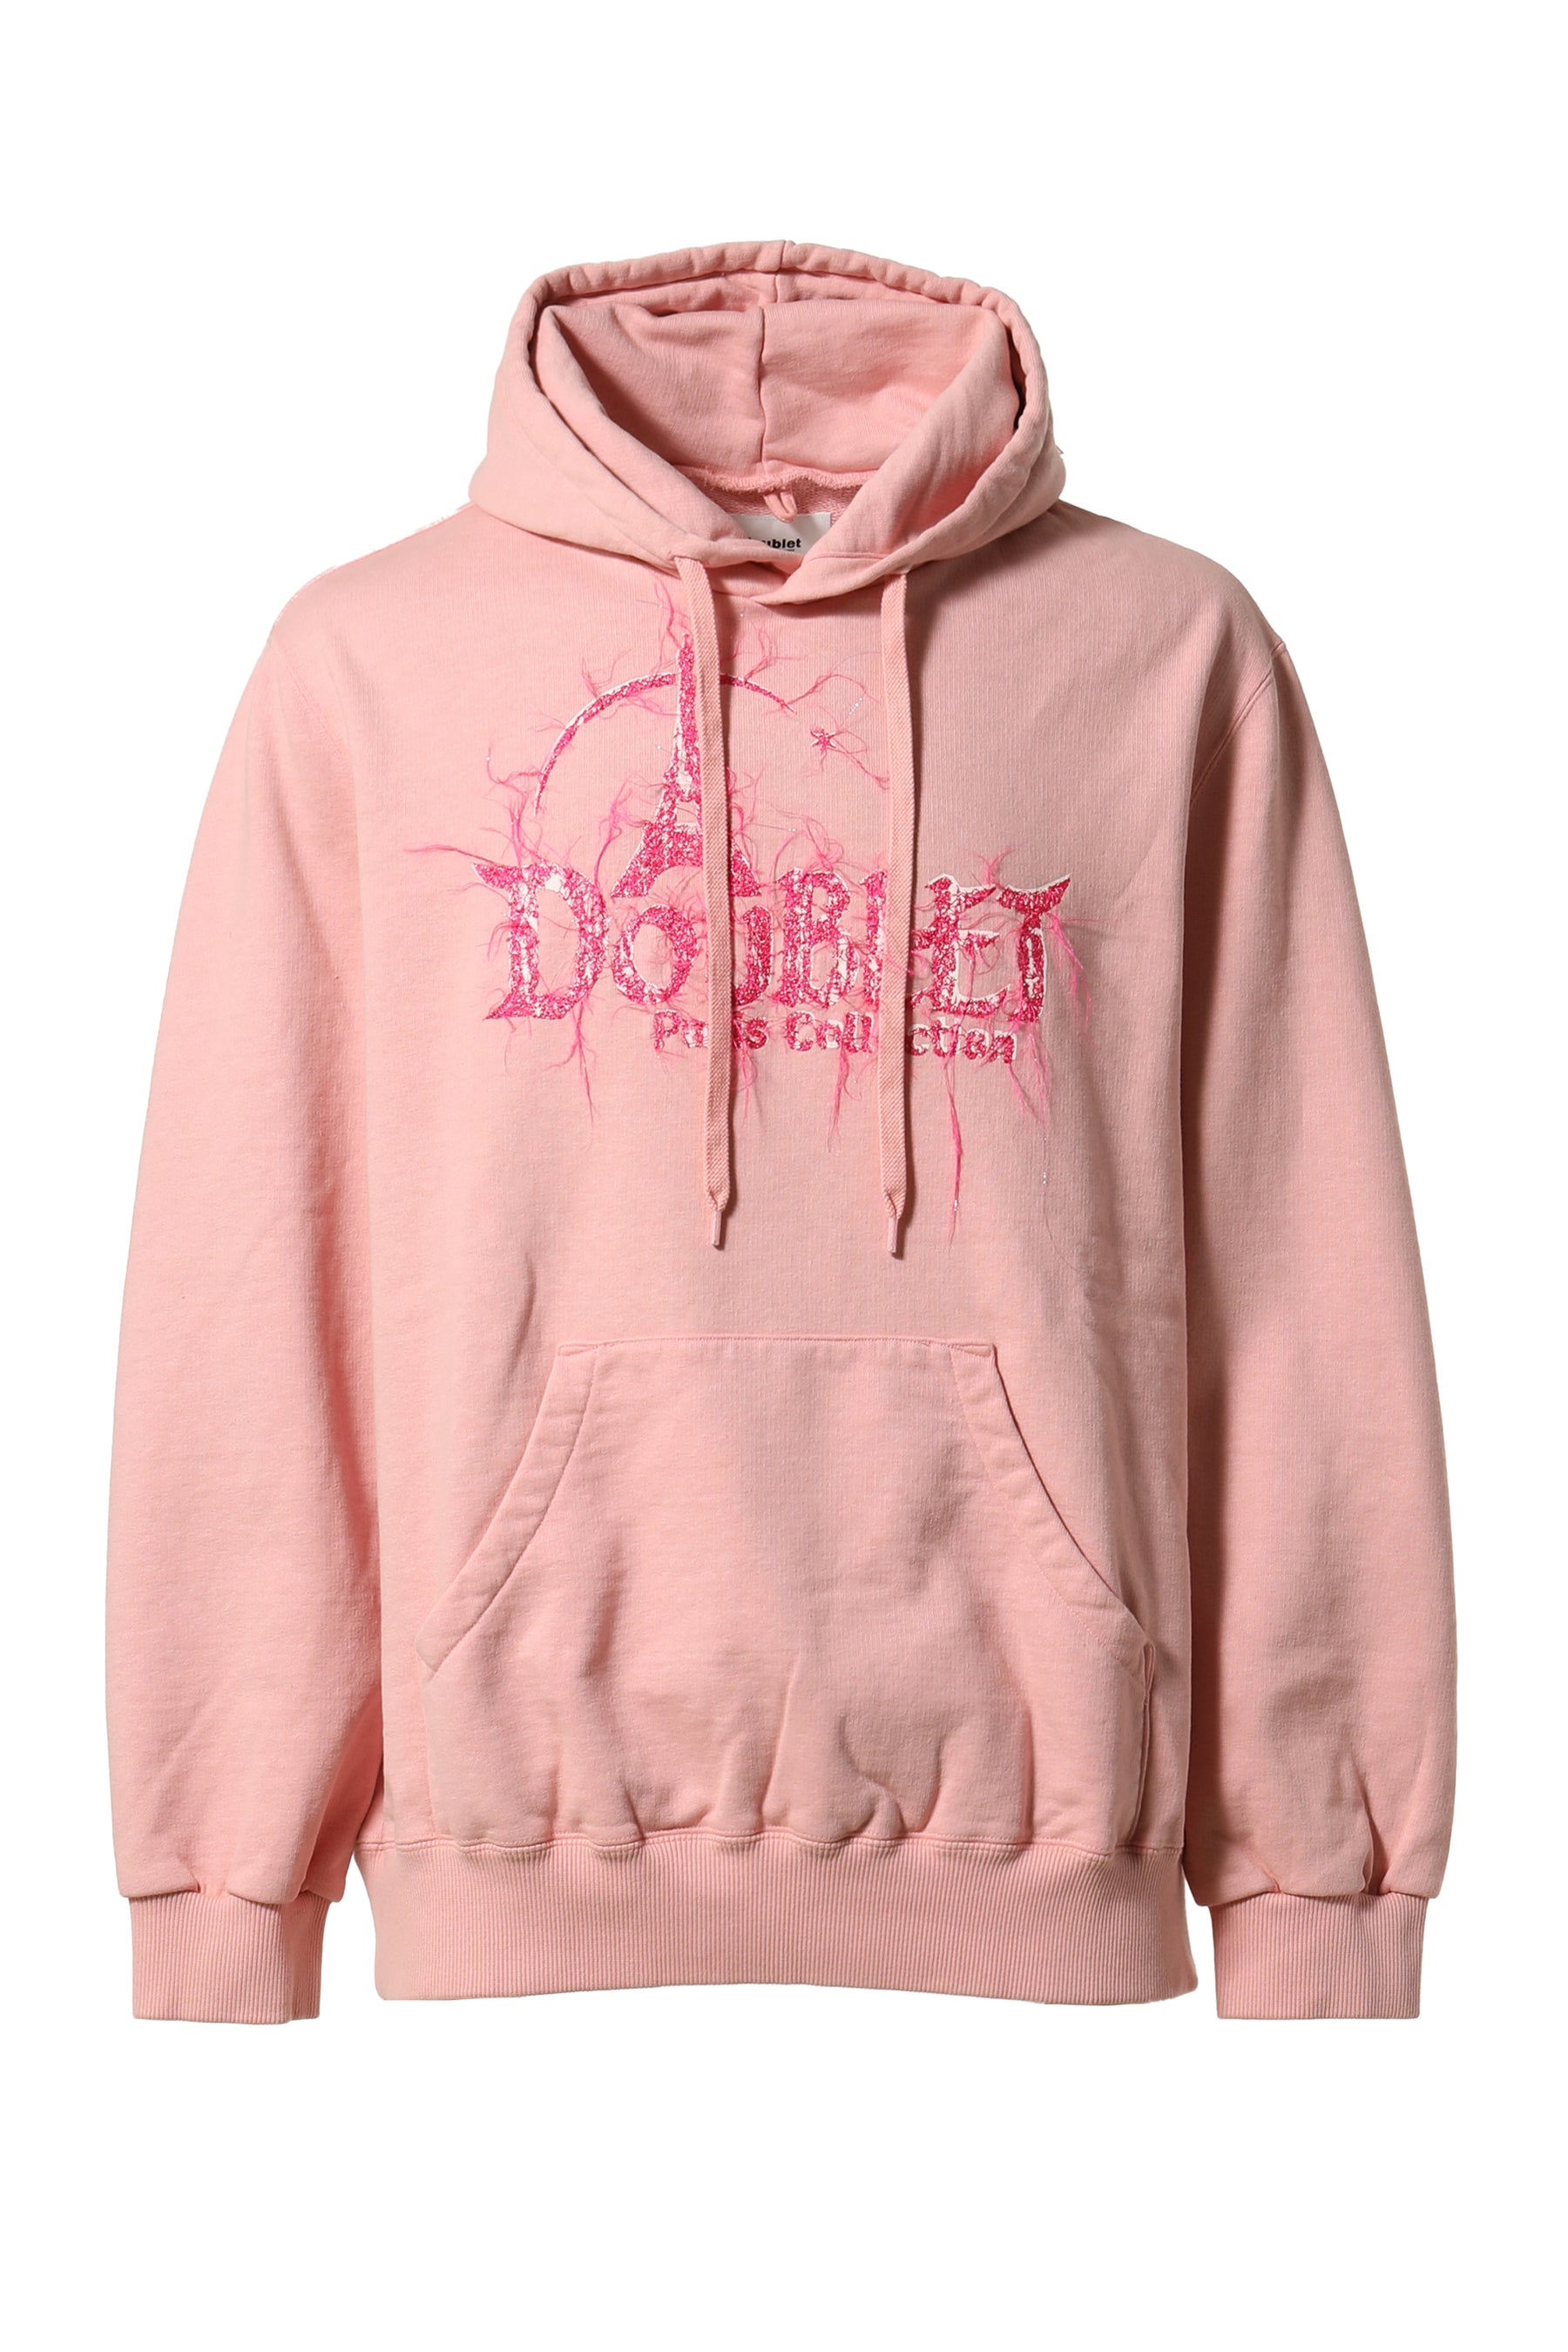 "DOUBLAND" EMBROIDERY HOODIE / PINK